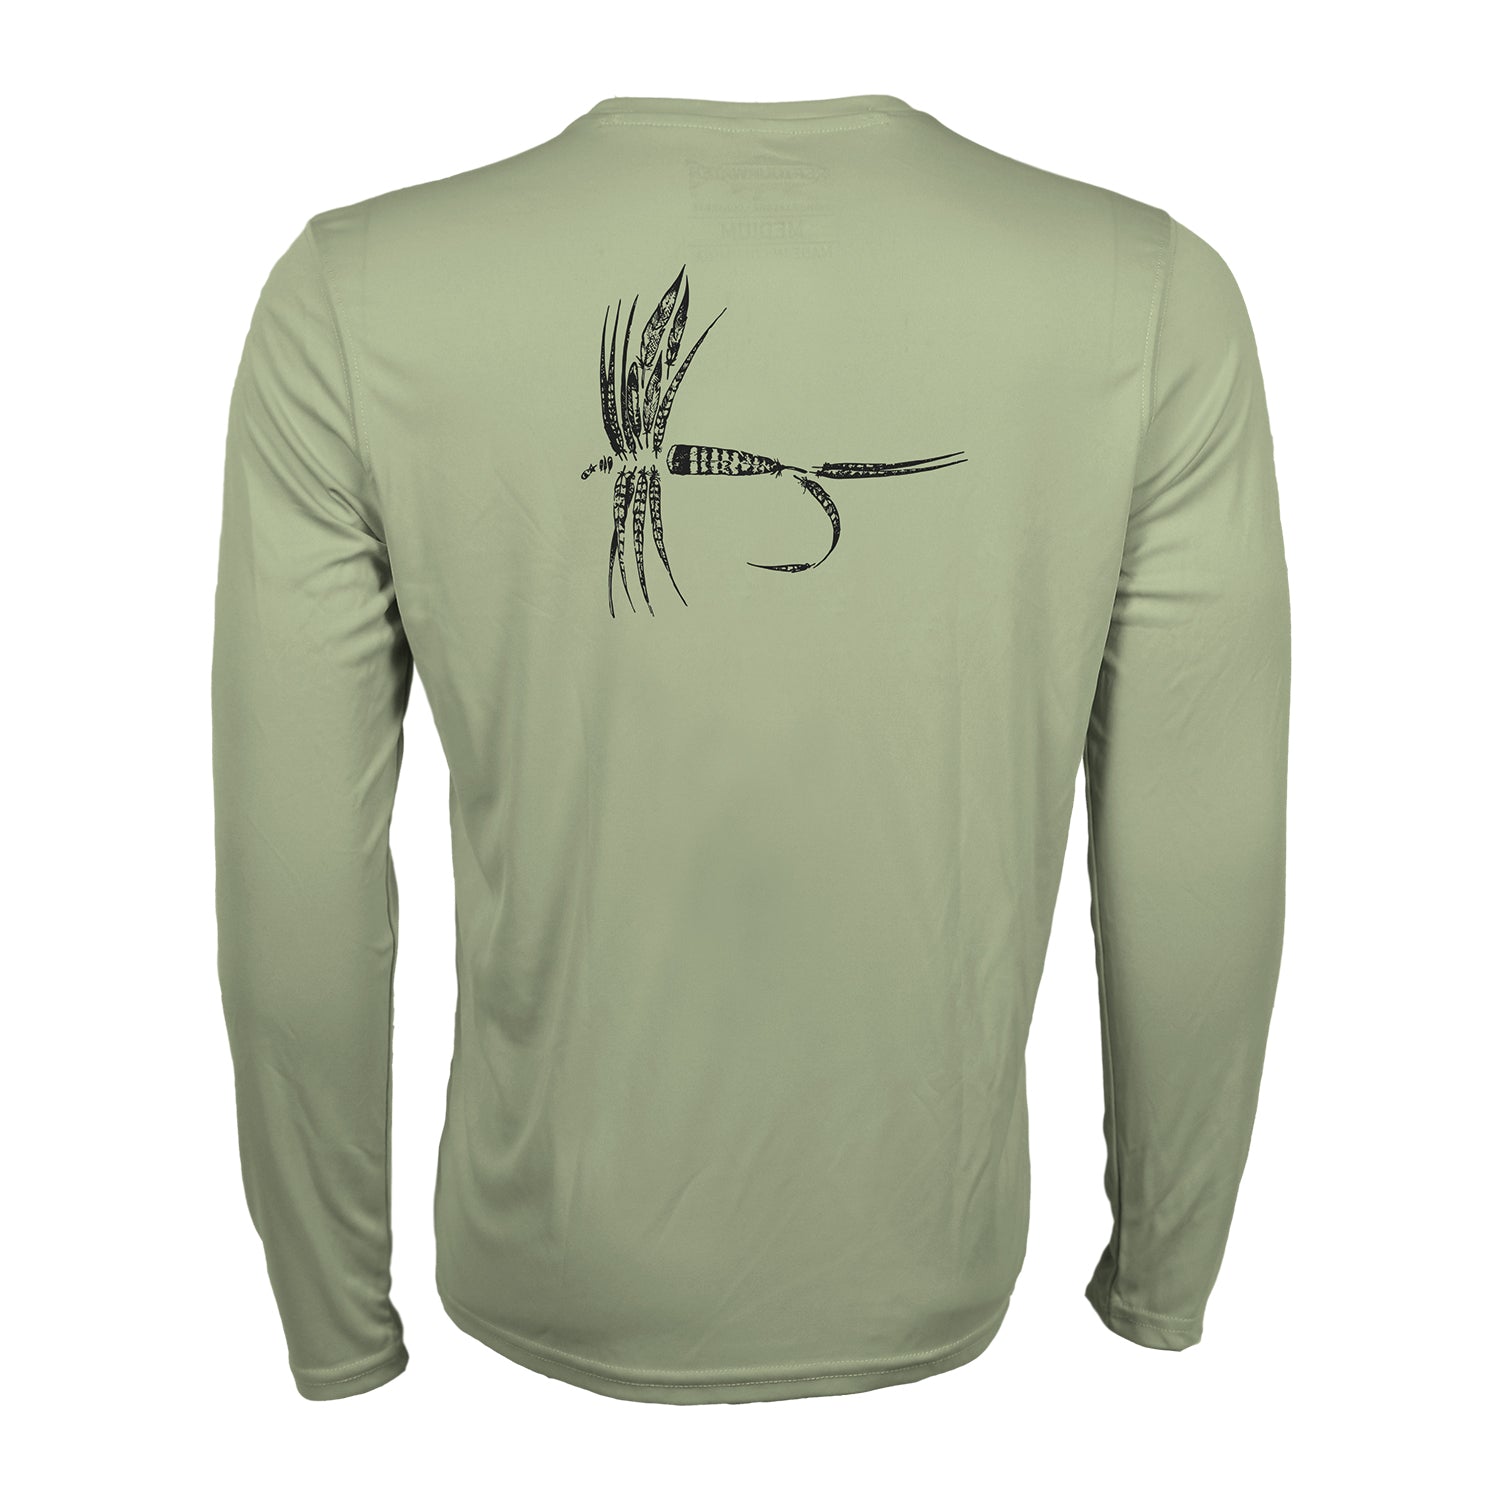 backside of green sun shirt that has a dry fly made up of feathers